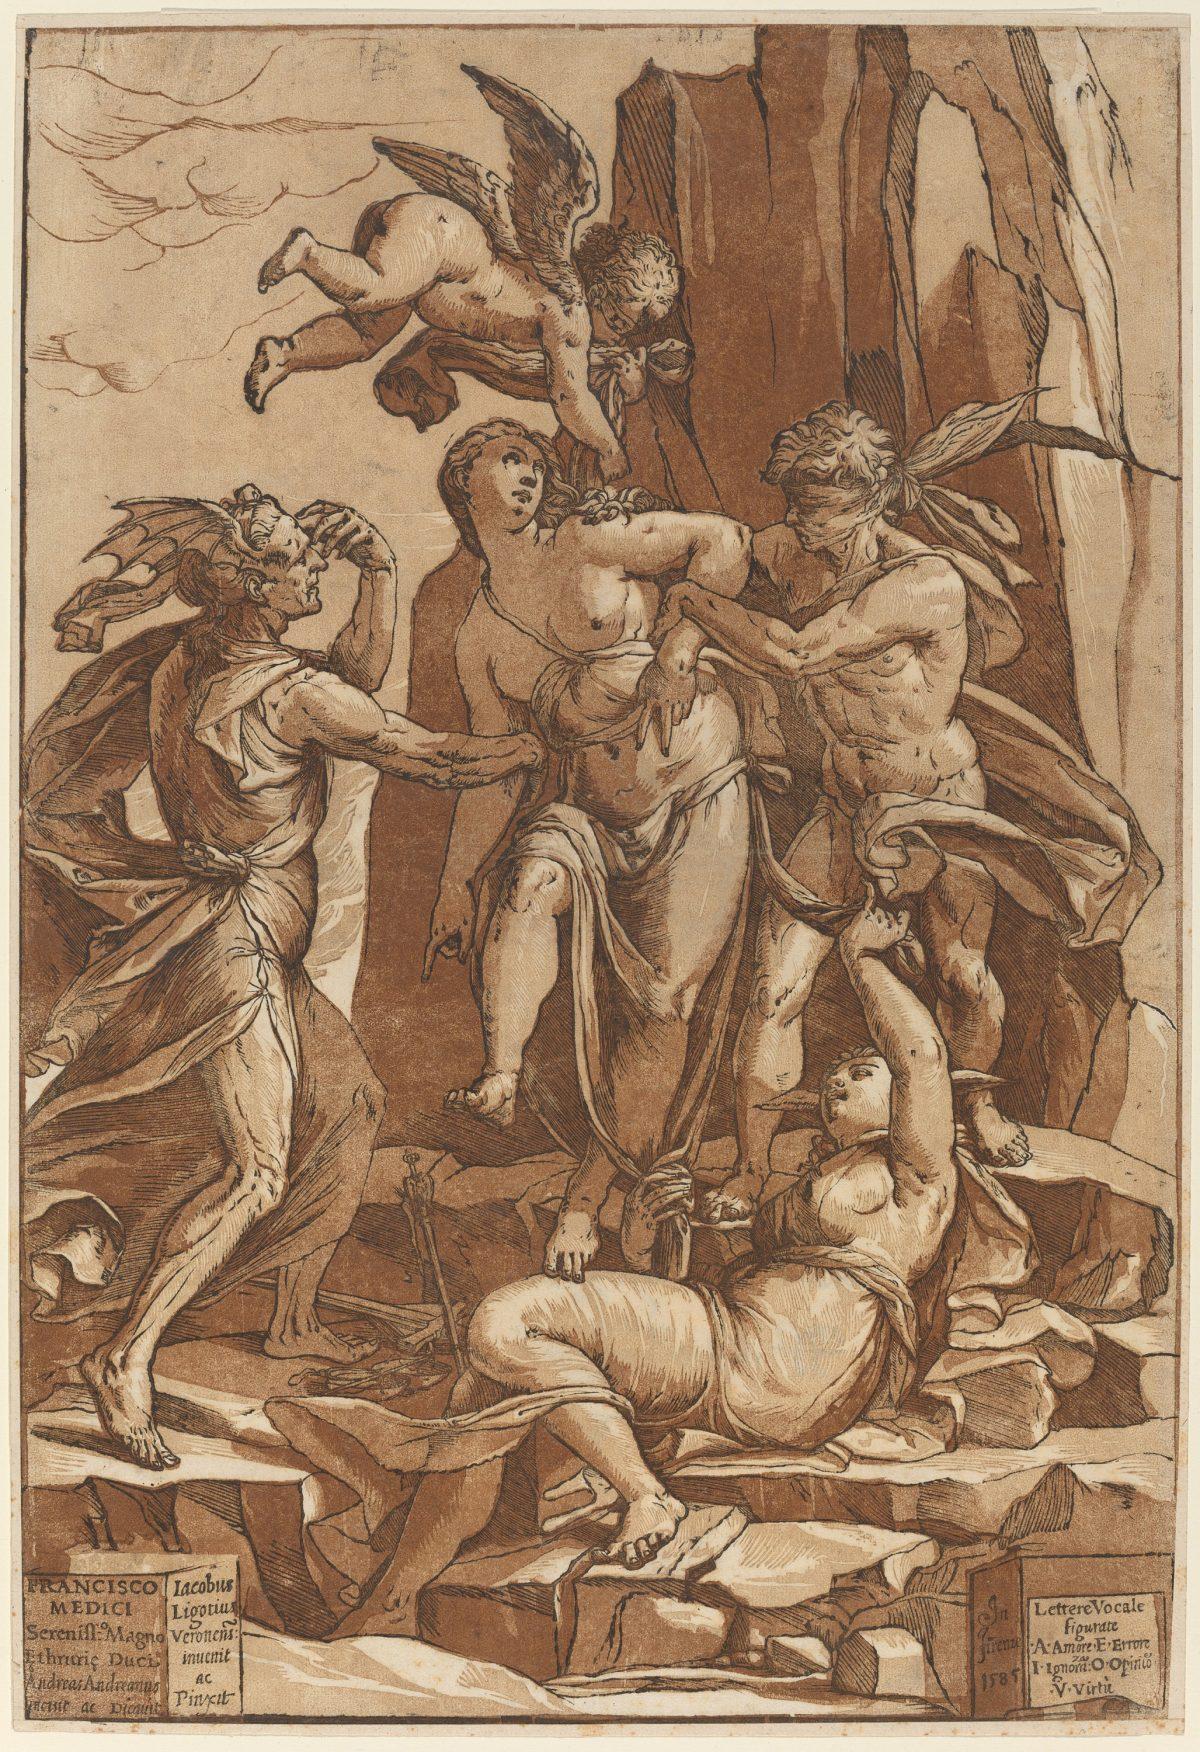 “Allegory of Virtue,” 1585, by Andrea Andreani, after Jacopo Ligozzi. Chiaroscuro woodcut from four blocks in light brown, medium brown, dark brown, and black, state i/ii, 19 inches by 13 inches. Ailsa Mellon Bruce Fund. (National Gallery of Art)